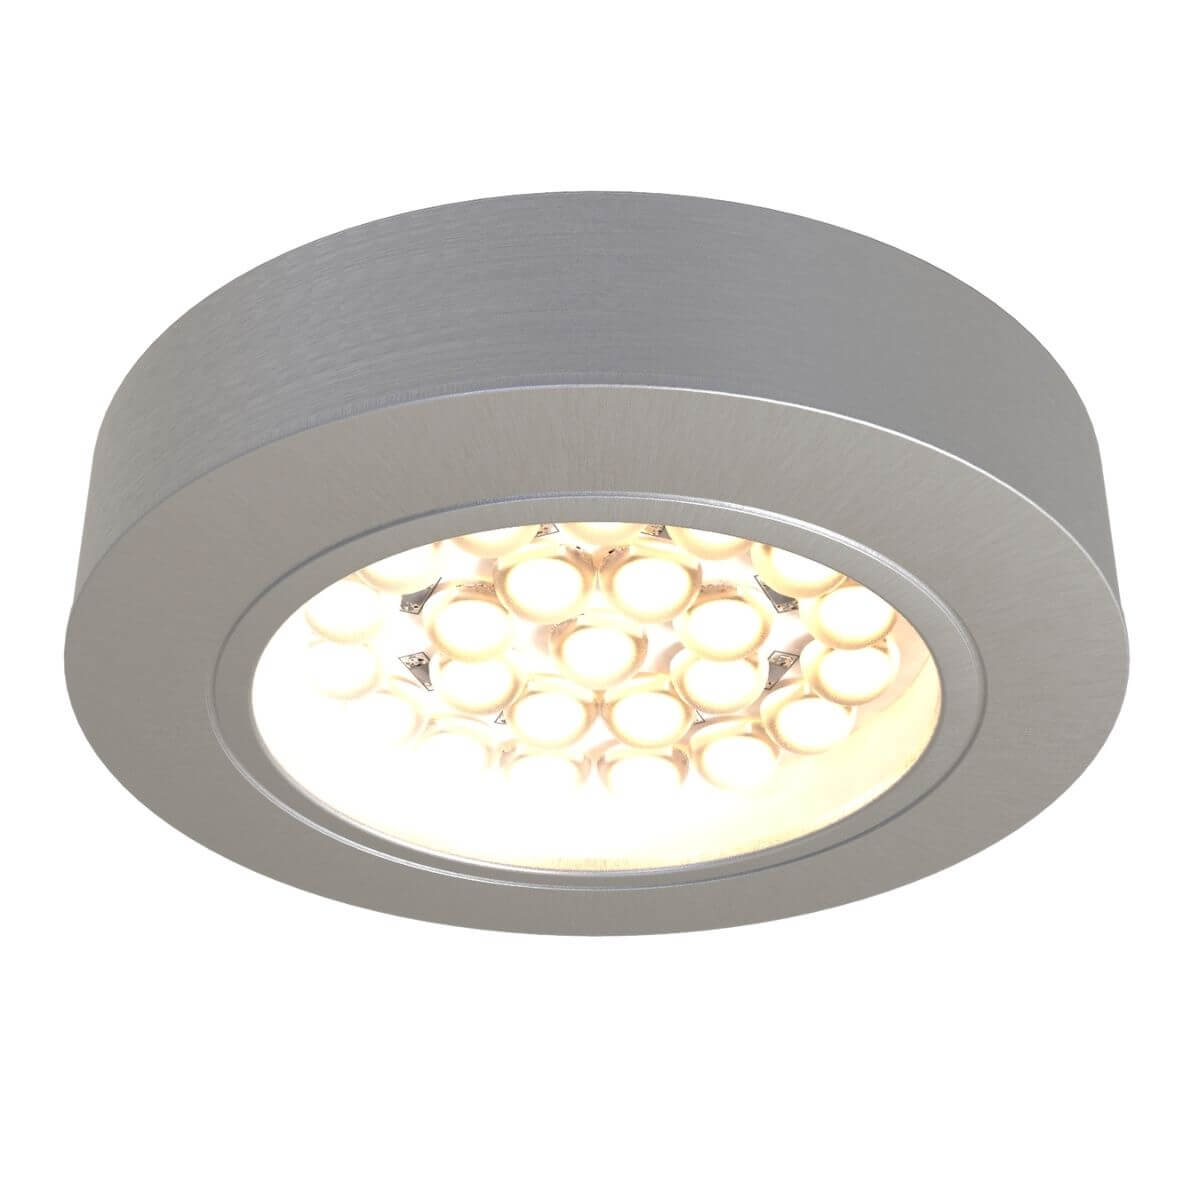 View Superslim 18w LED Surface Mounted Under Cupboard Light information